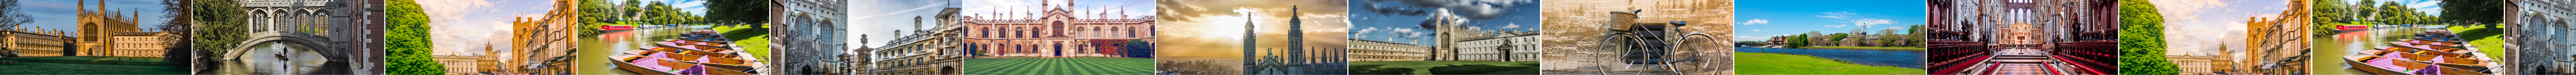 Locations and landmarks from Cambridge to highlight the Cambridge vacancies.